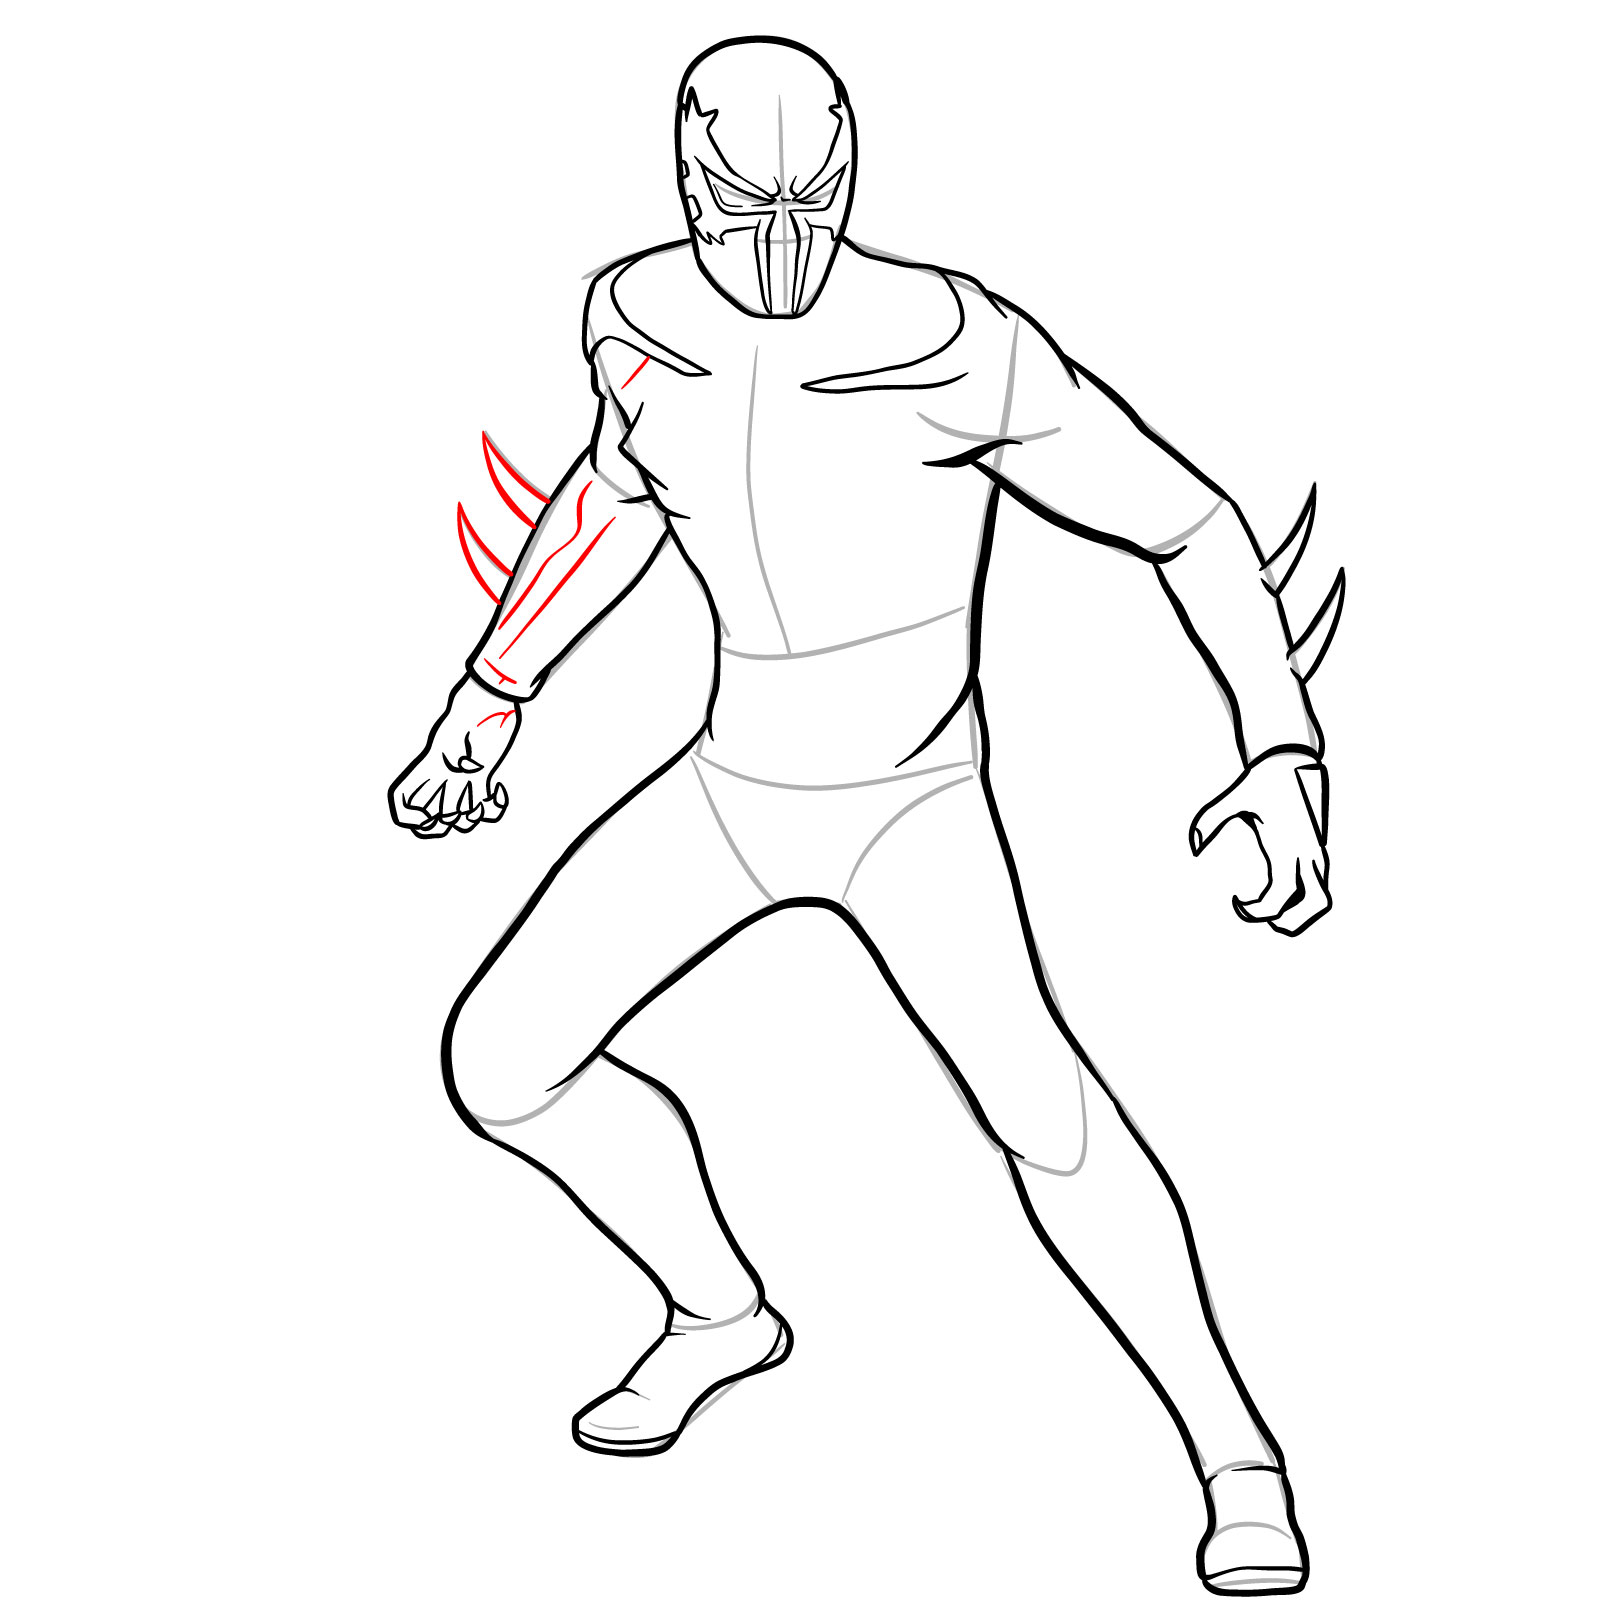 How to draw Spider-Man 2099 - step 27